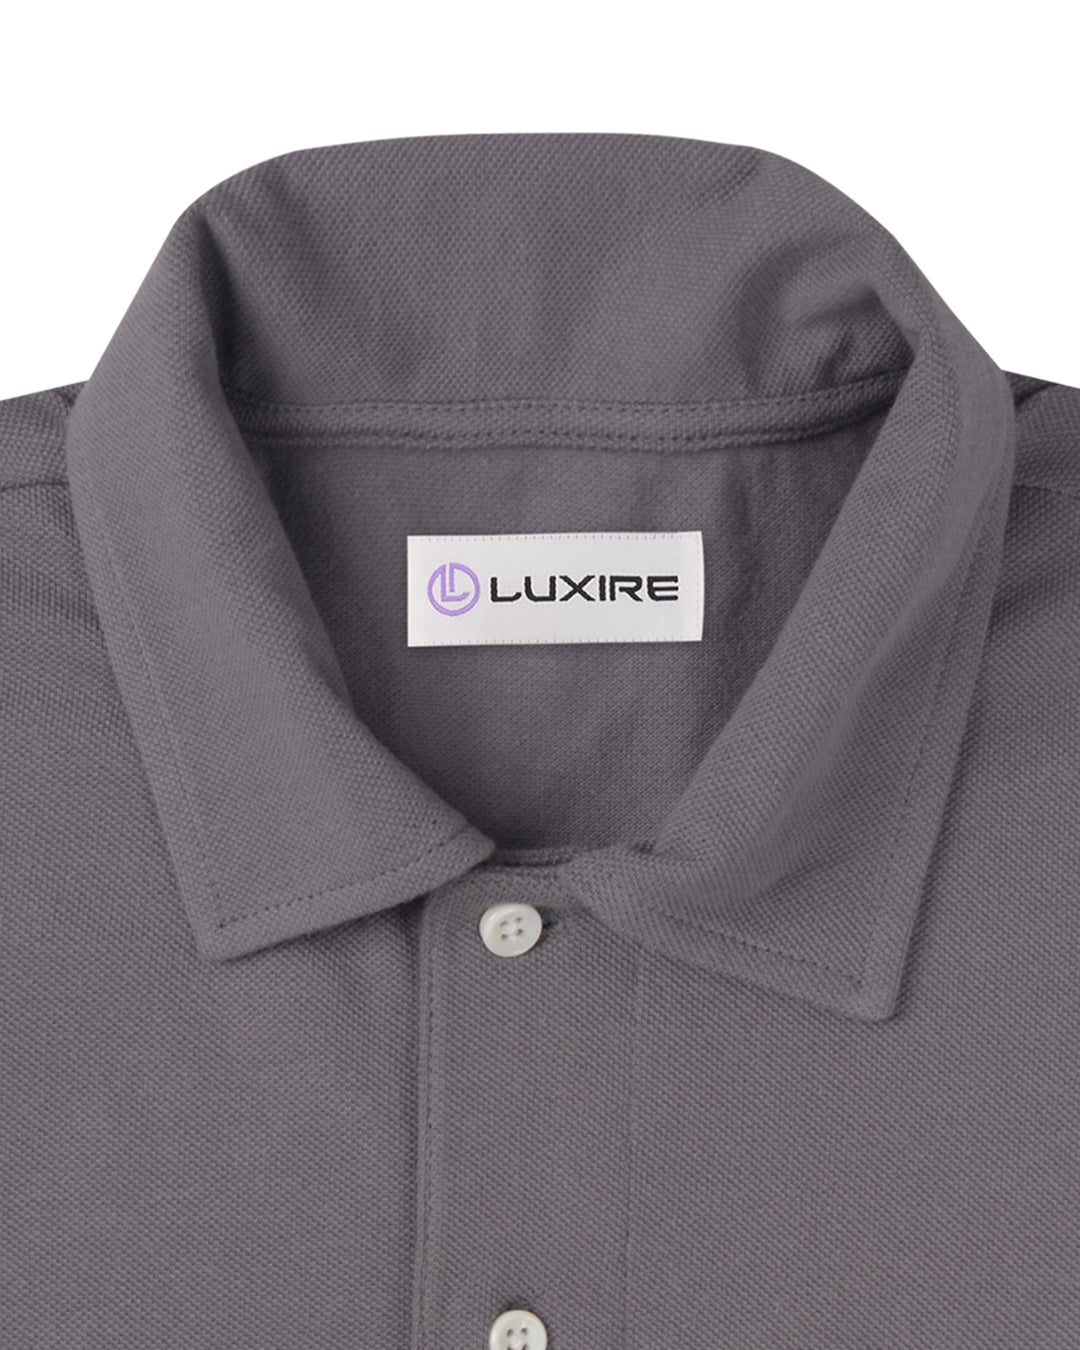 Collar of the custom oxford polo shirt for men by Luxire in flint grey